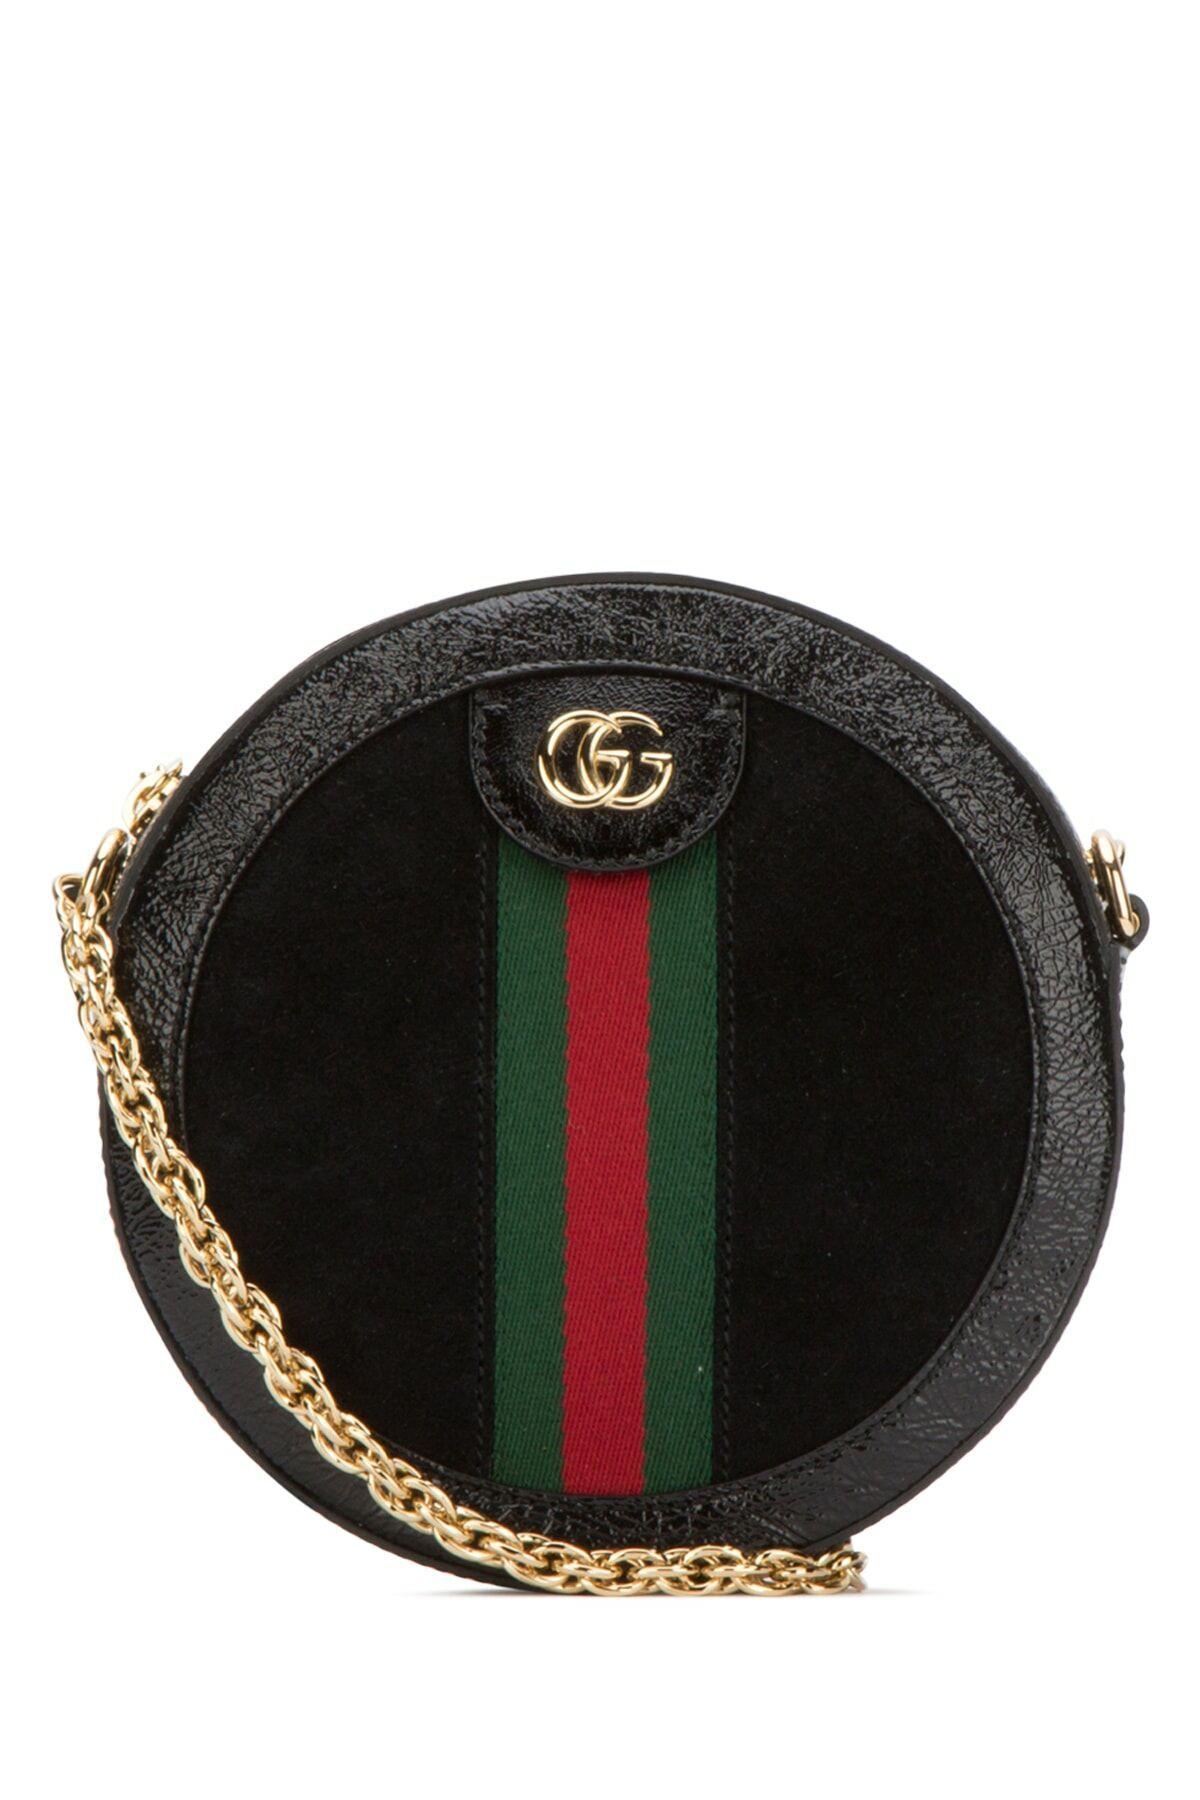 Gucci Suede Ophidia Mini GG Supreme Canvas & Leather Bucket Bag in Black -  Lyst